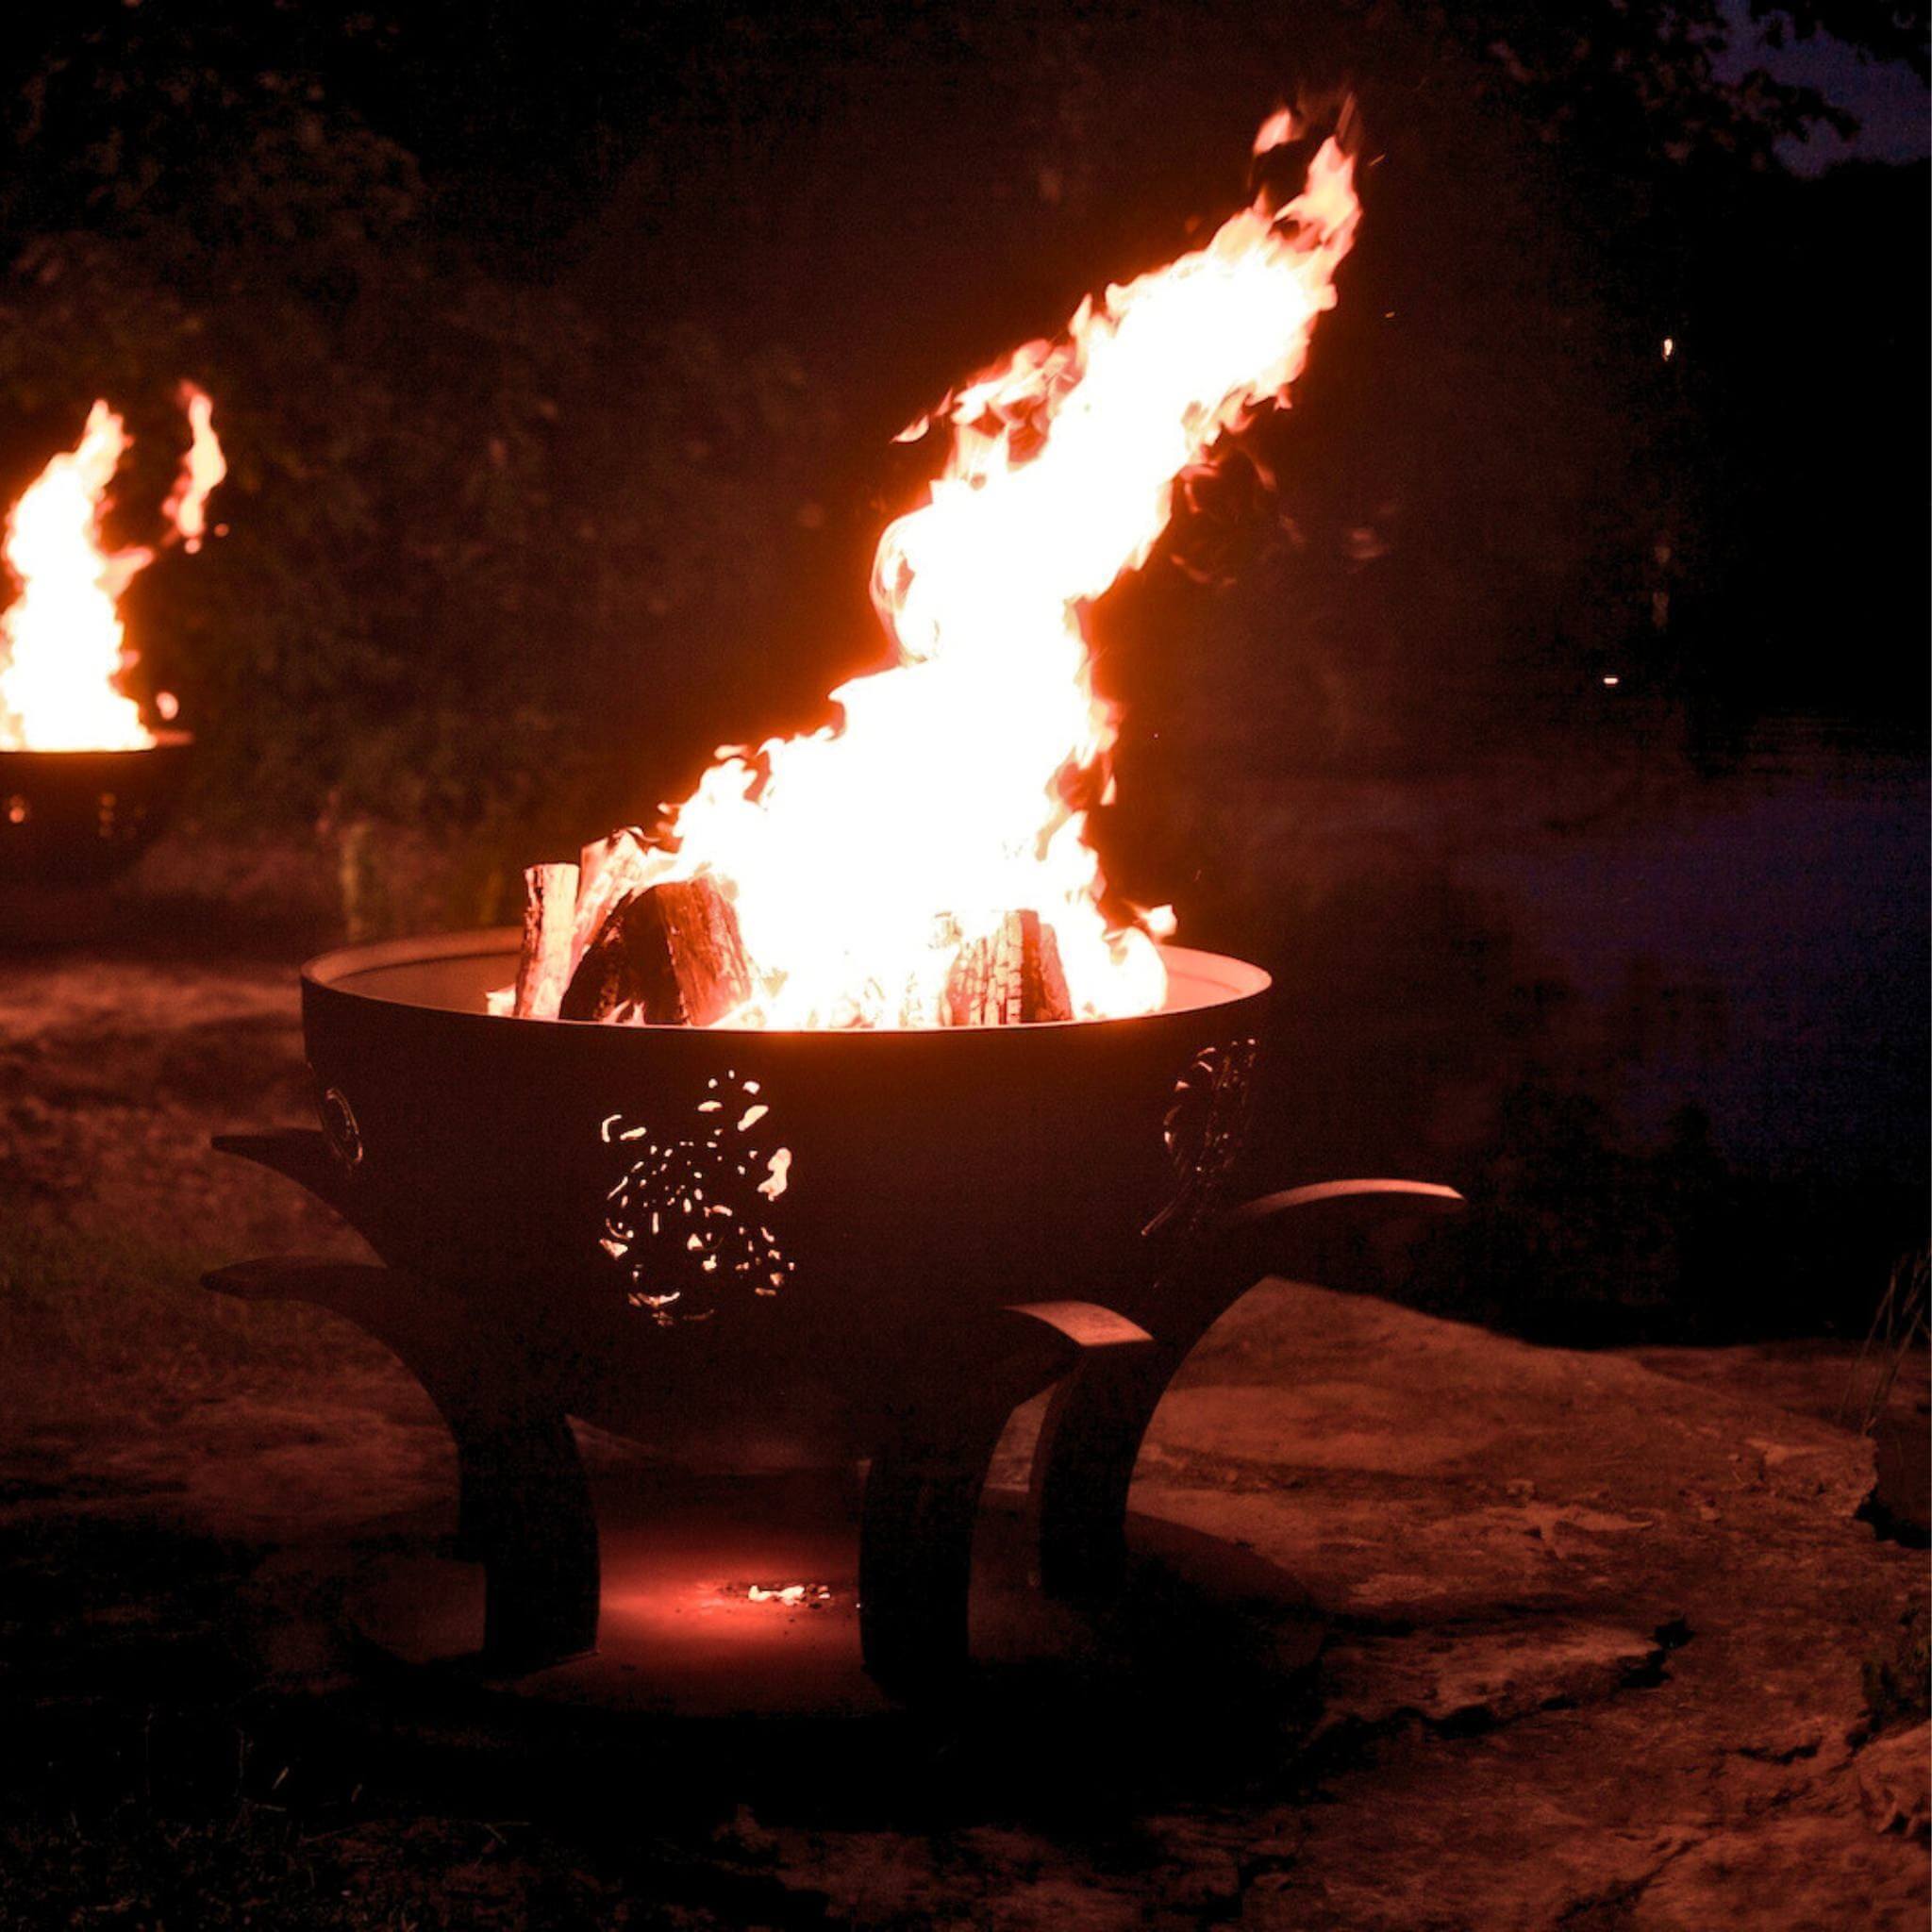 "Africa's Big Five" Wood Burning Fire Pit in Steel - Fire Pit Art